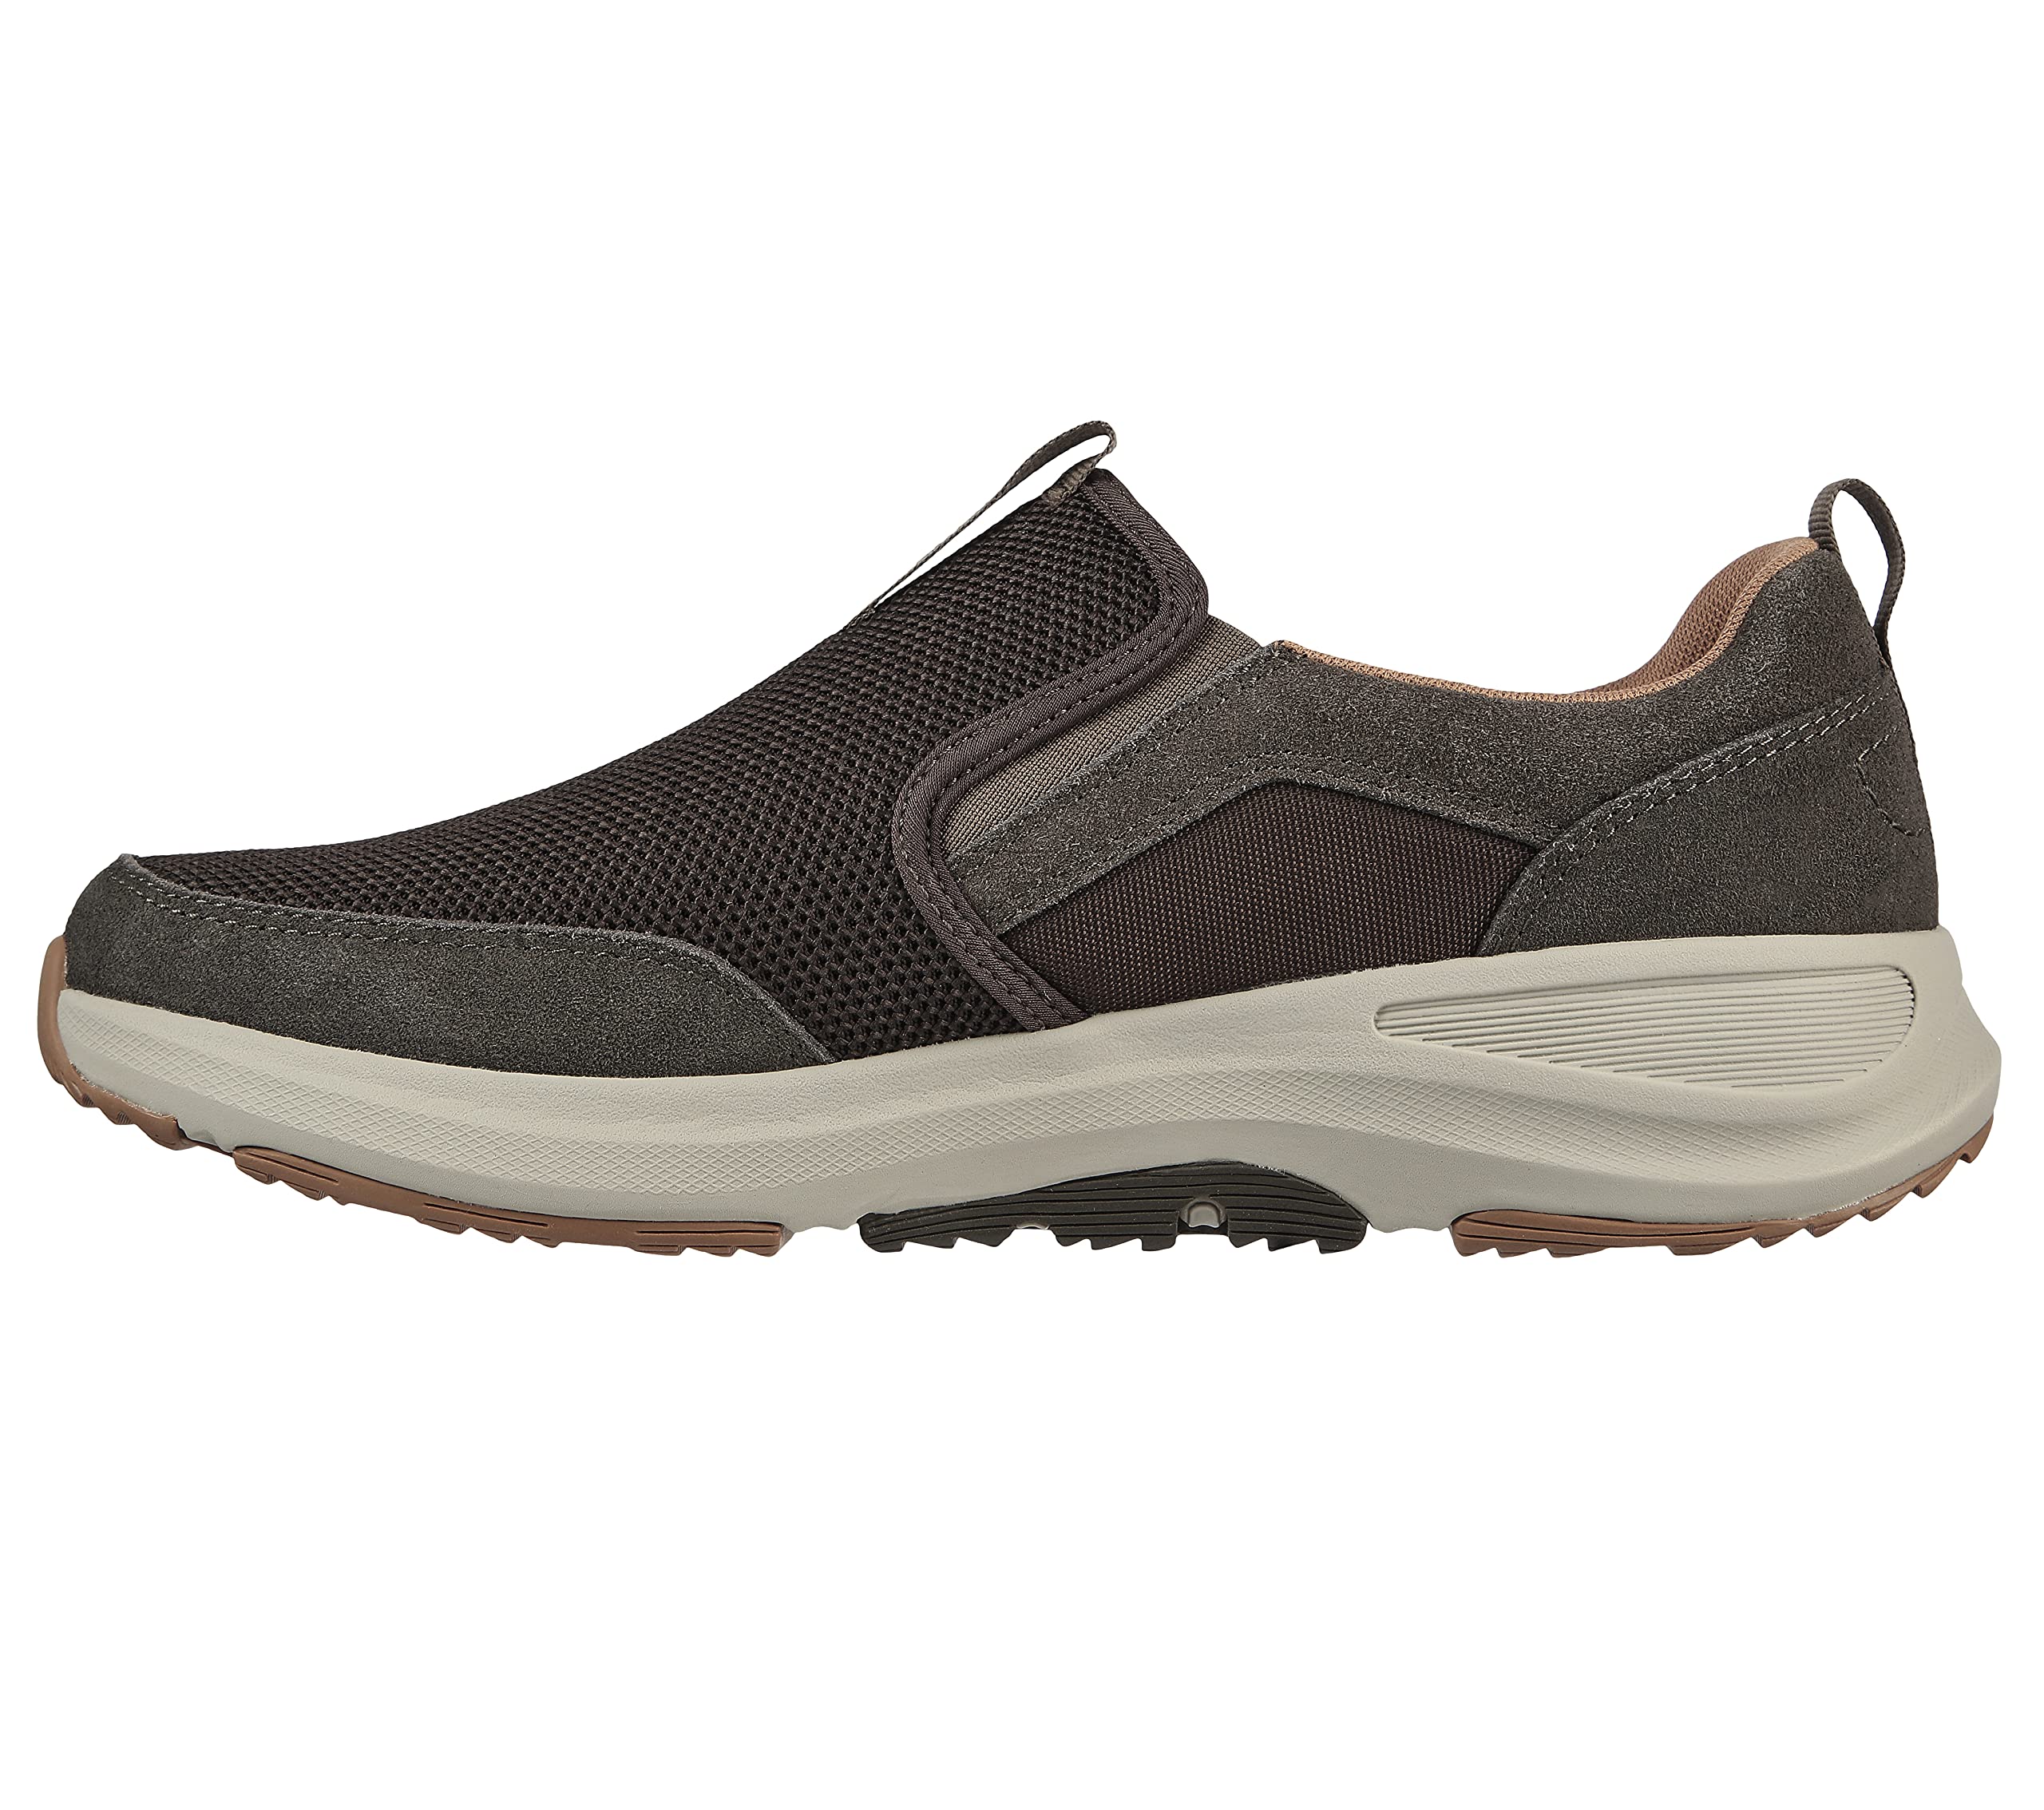 Skechers Men's Go Walk Outdoor-Athletic Slip-on Trail Hiking Shoes with Air Cooled Memory Foam Sneaker